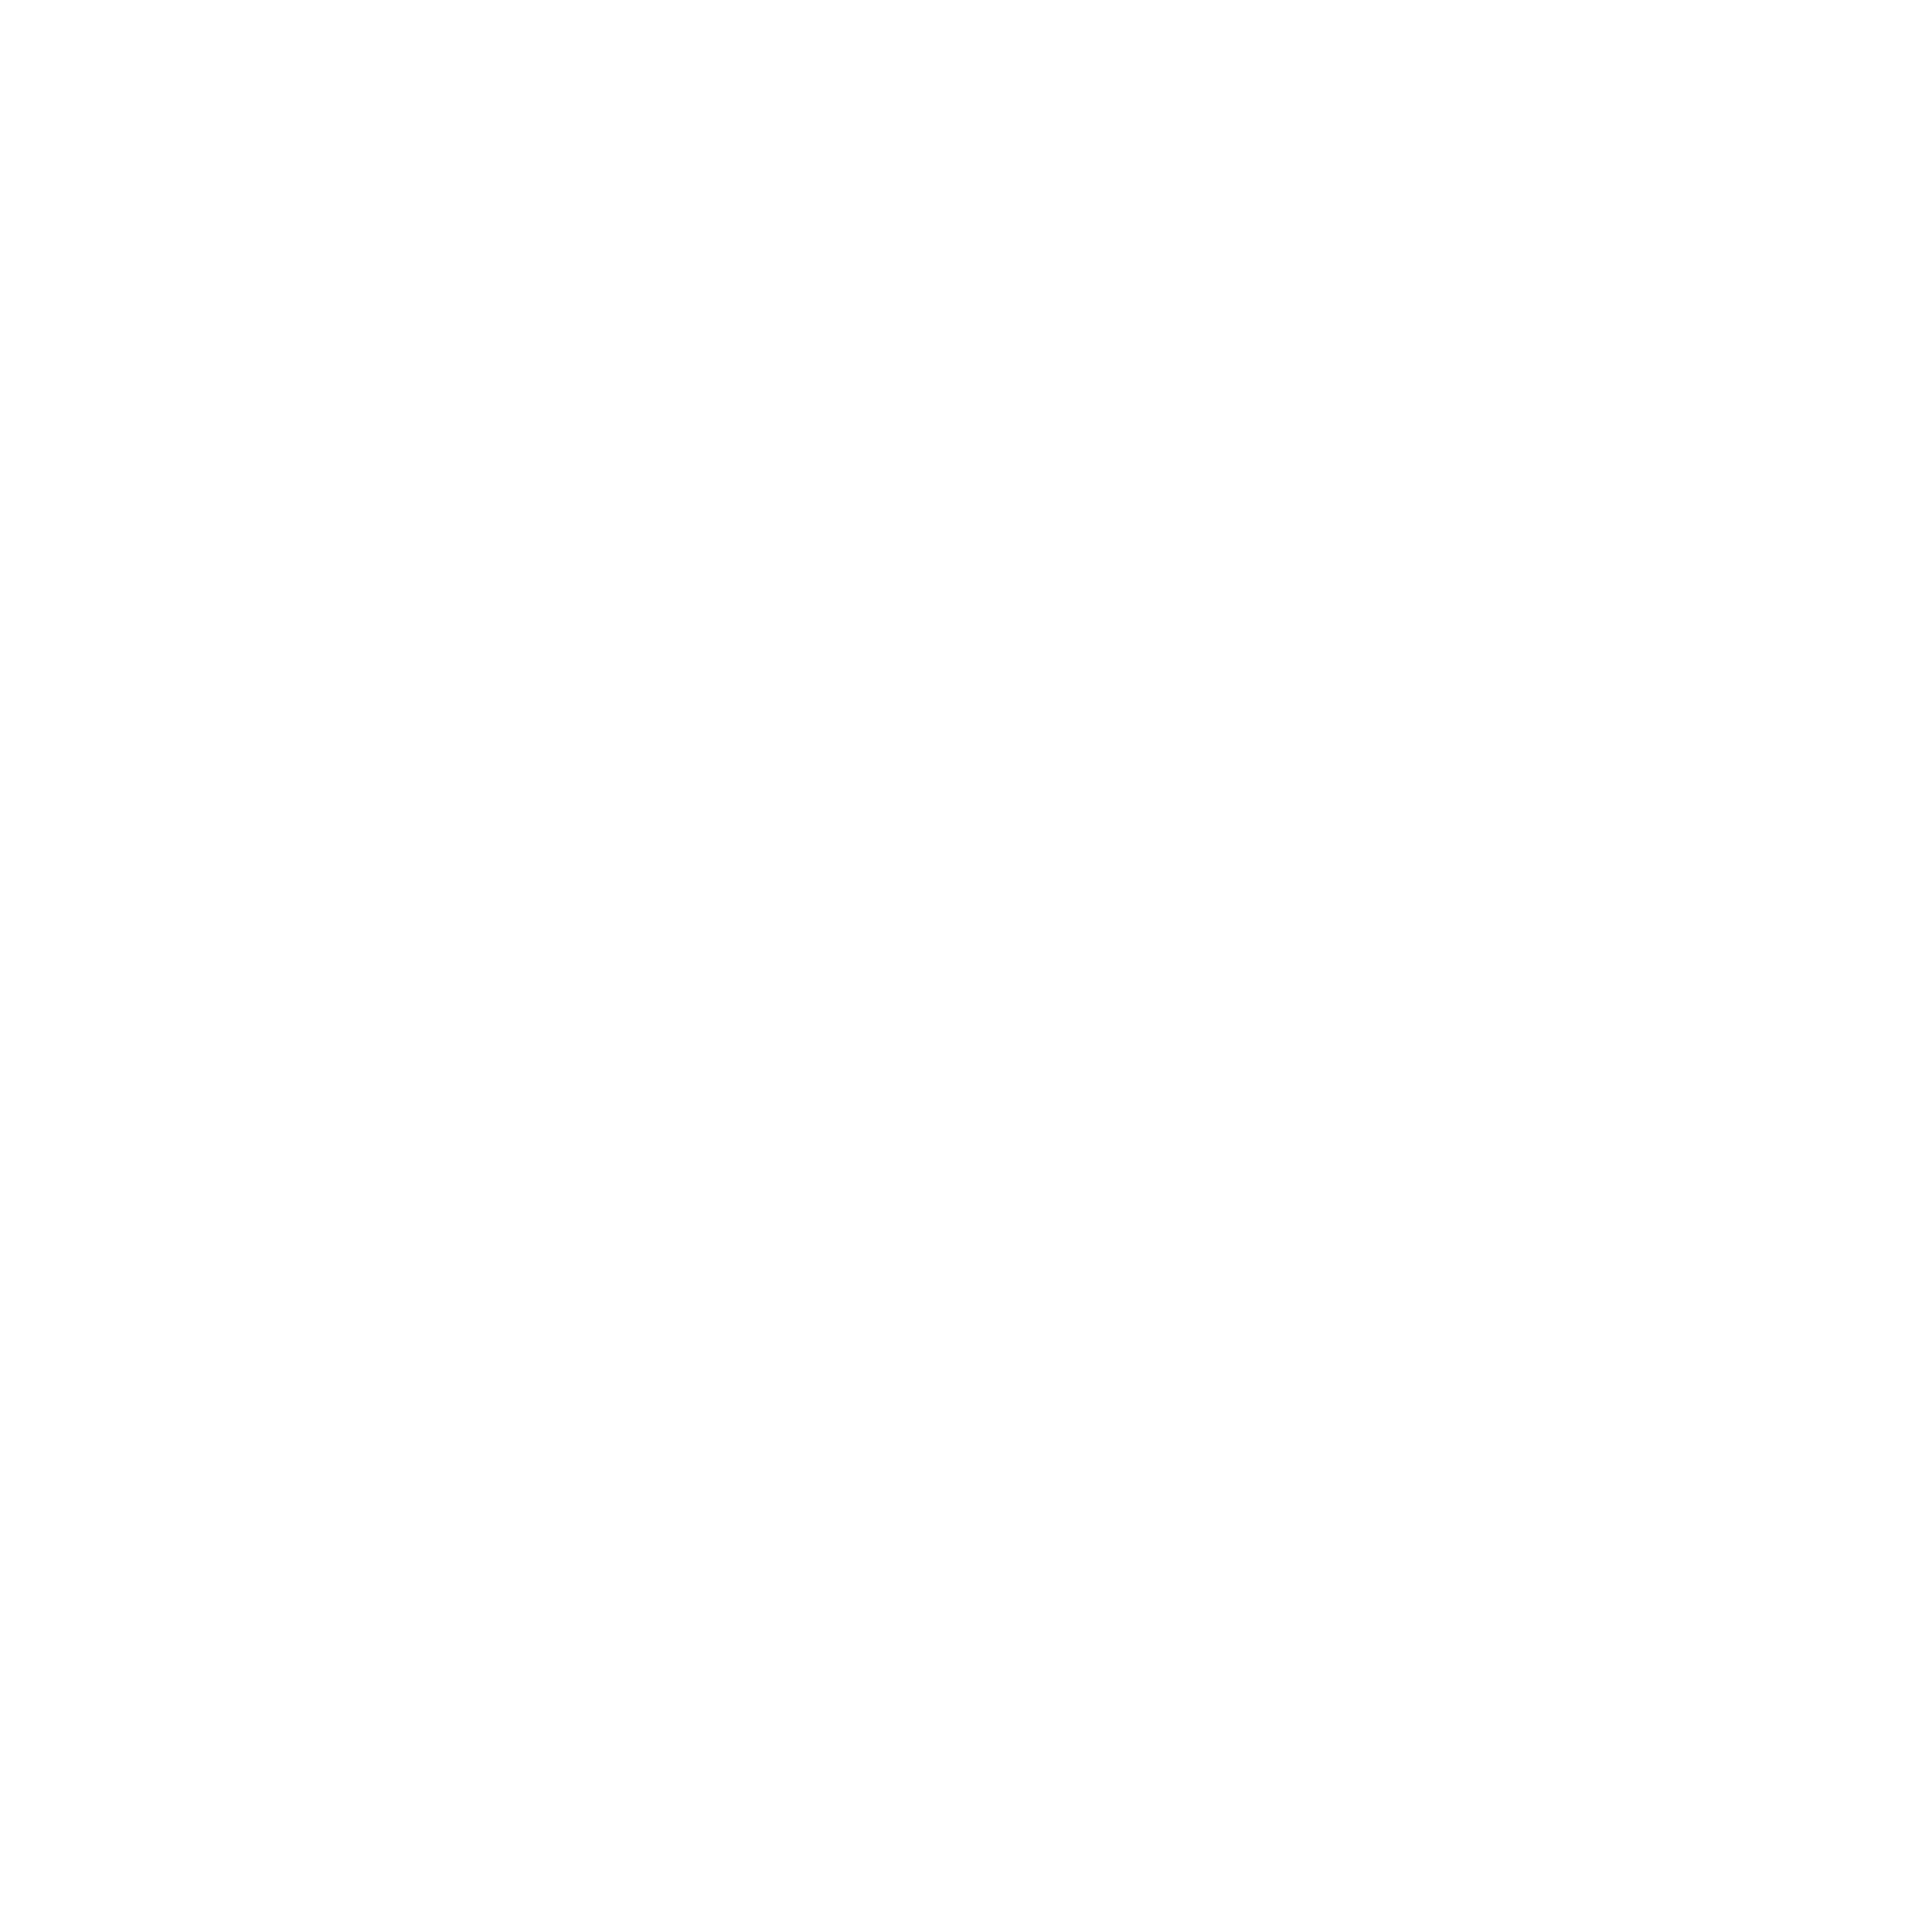 Top 4 reasons that students seek emergency assistance are for housing, food, transportation, and utilities